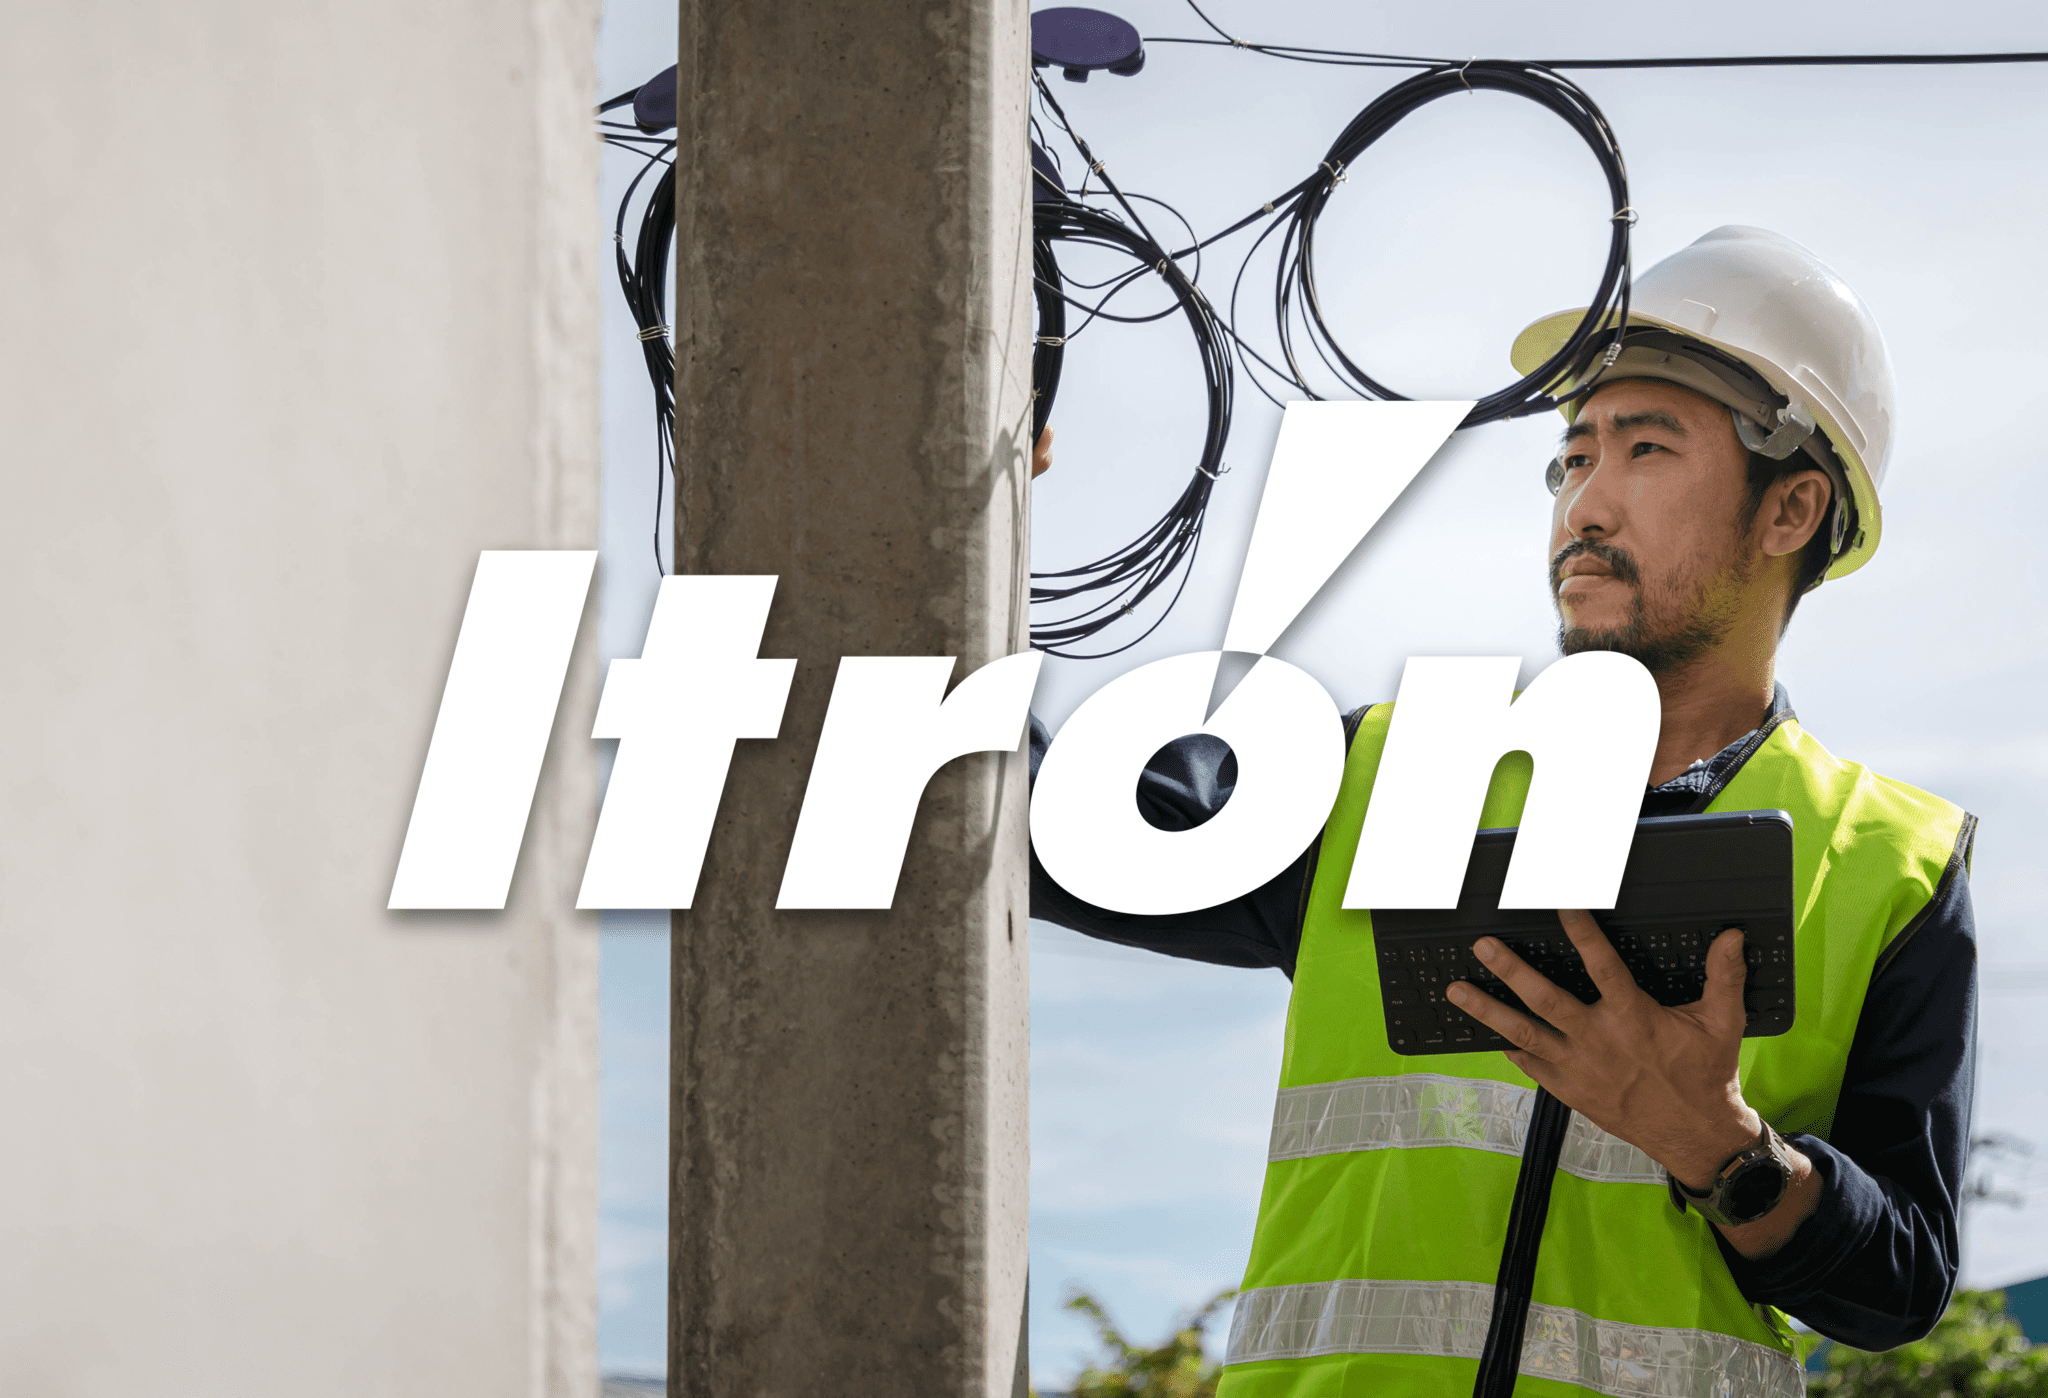 Itron Unveils the Future of Rural Smart Communities with New Fiber Mini Access Point Featuring Intelligent Connectivity